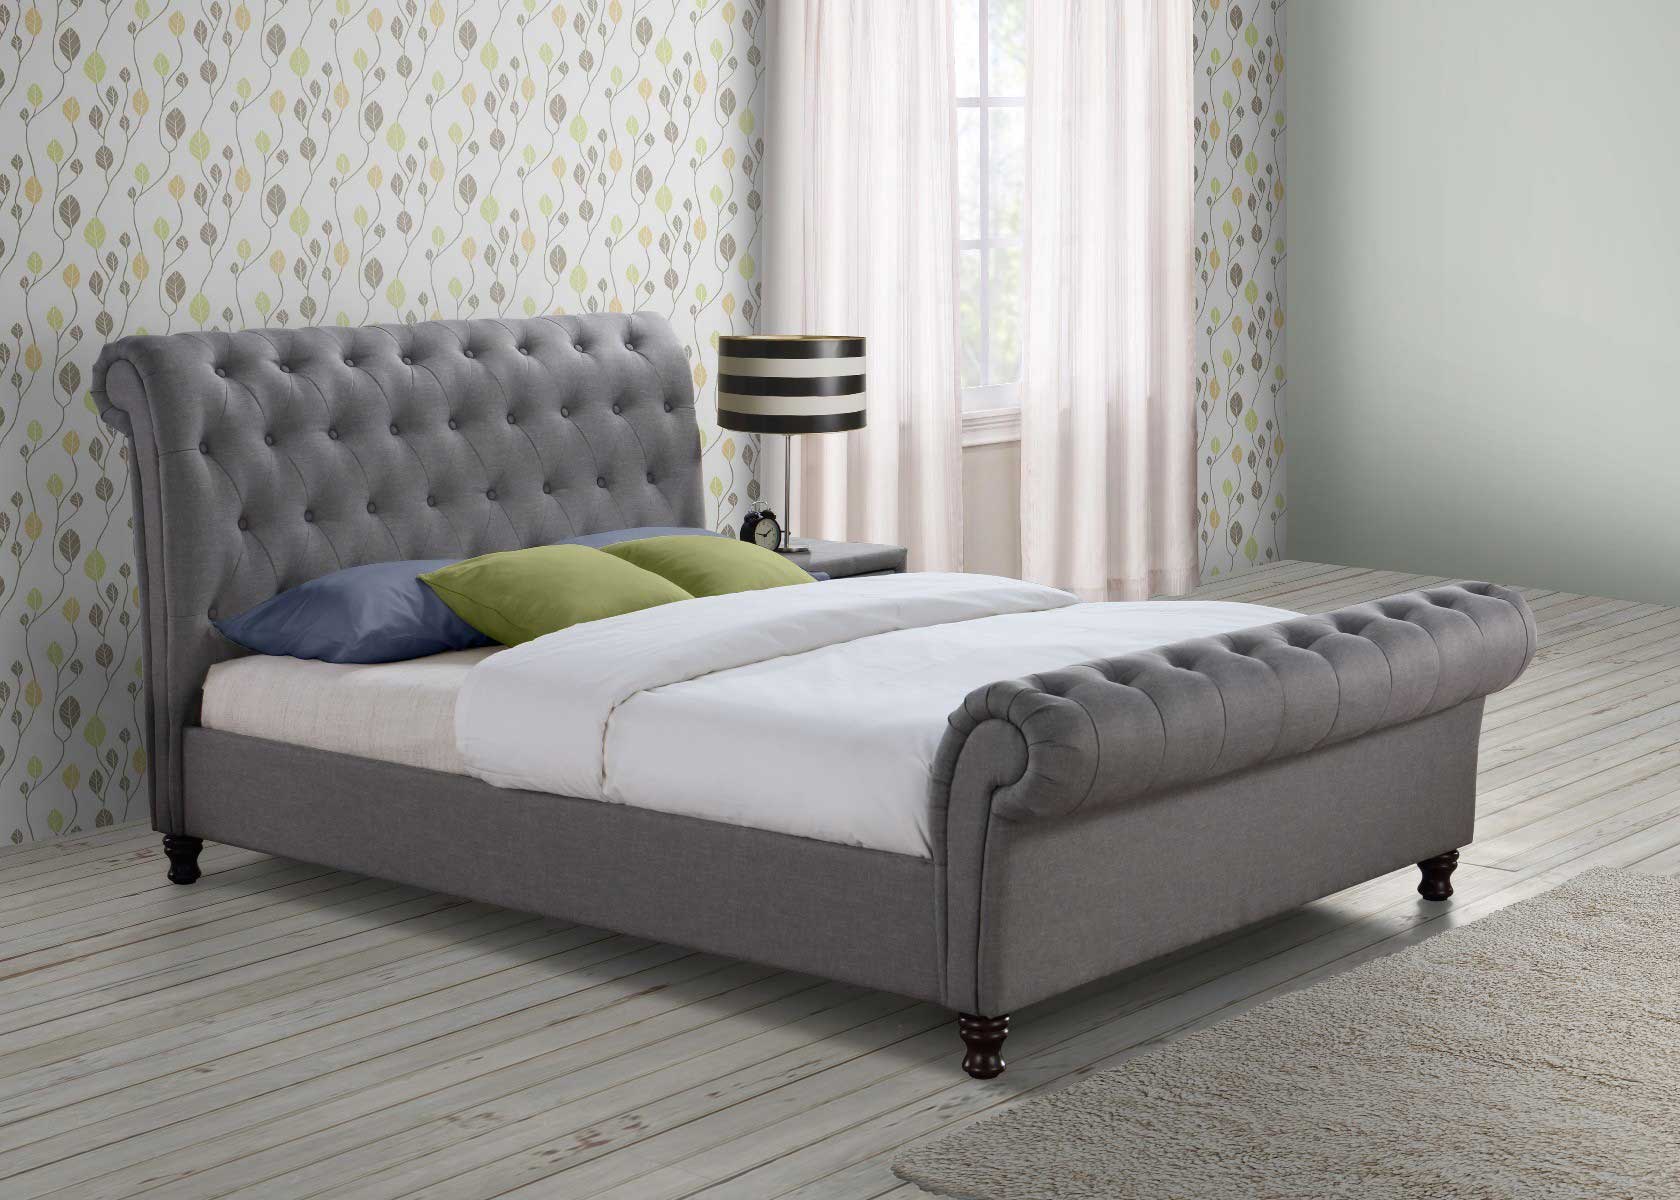 Shop Bedroom Furniture Beds and Mattresses - furnish well